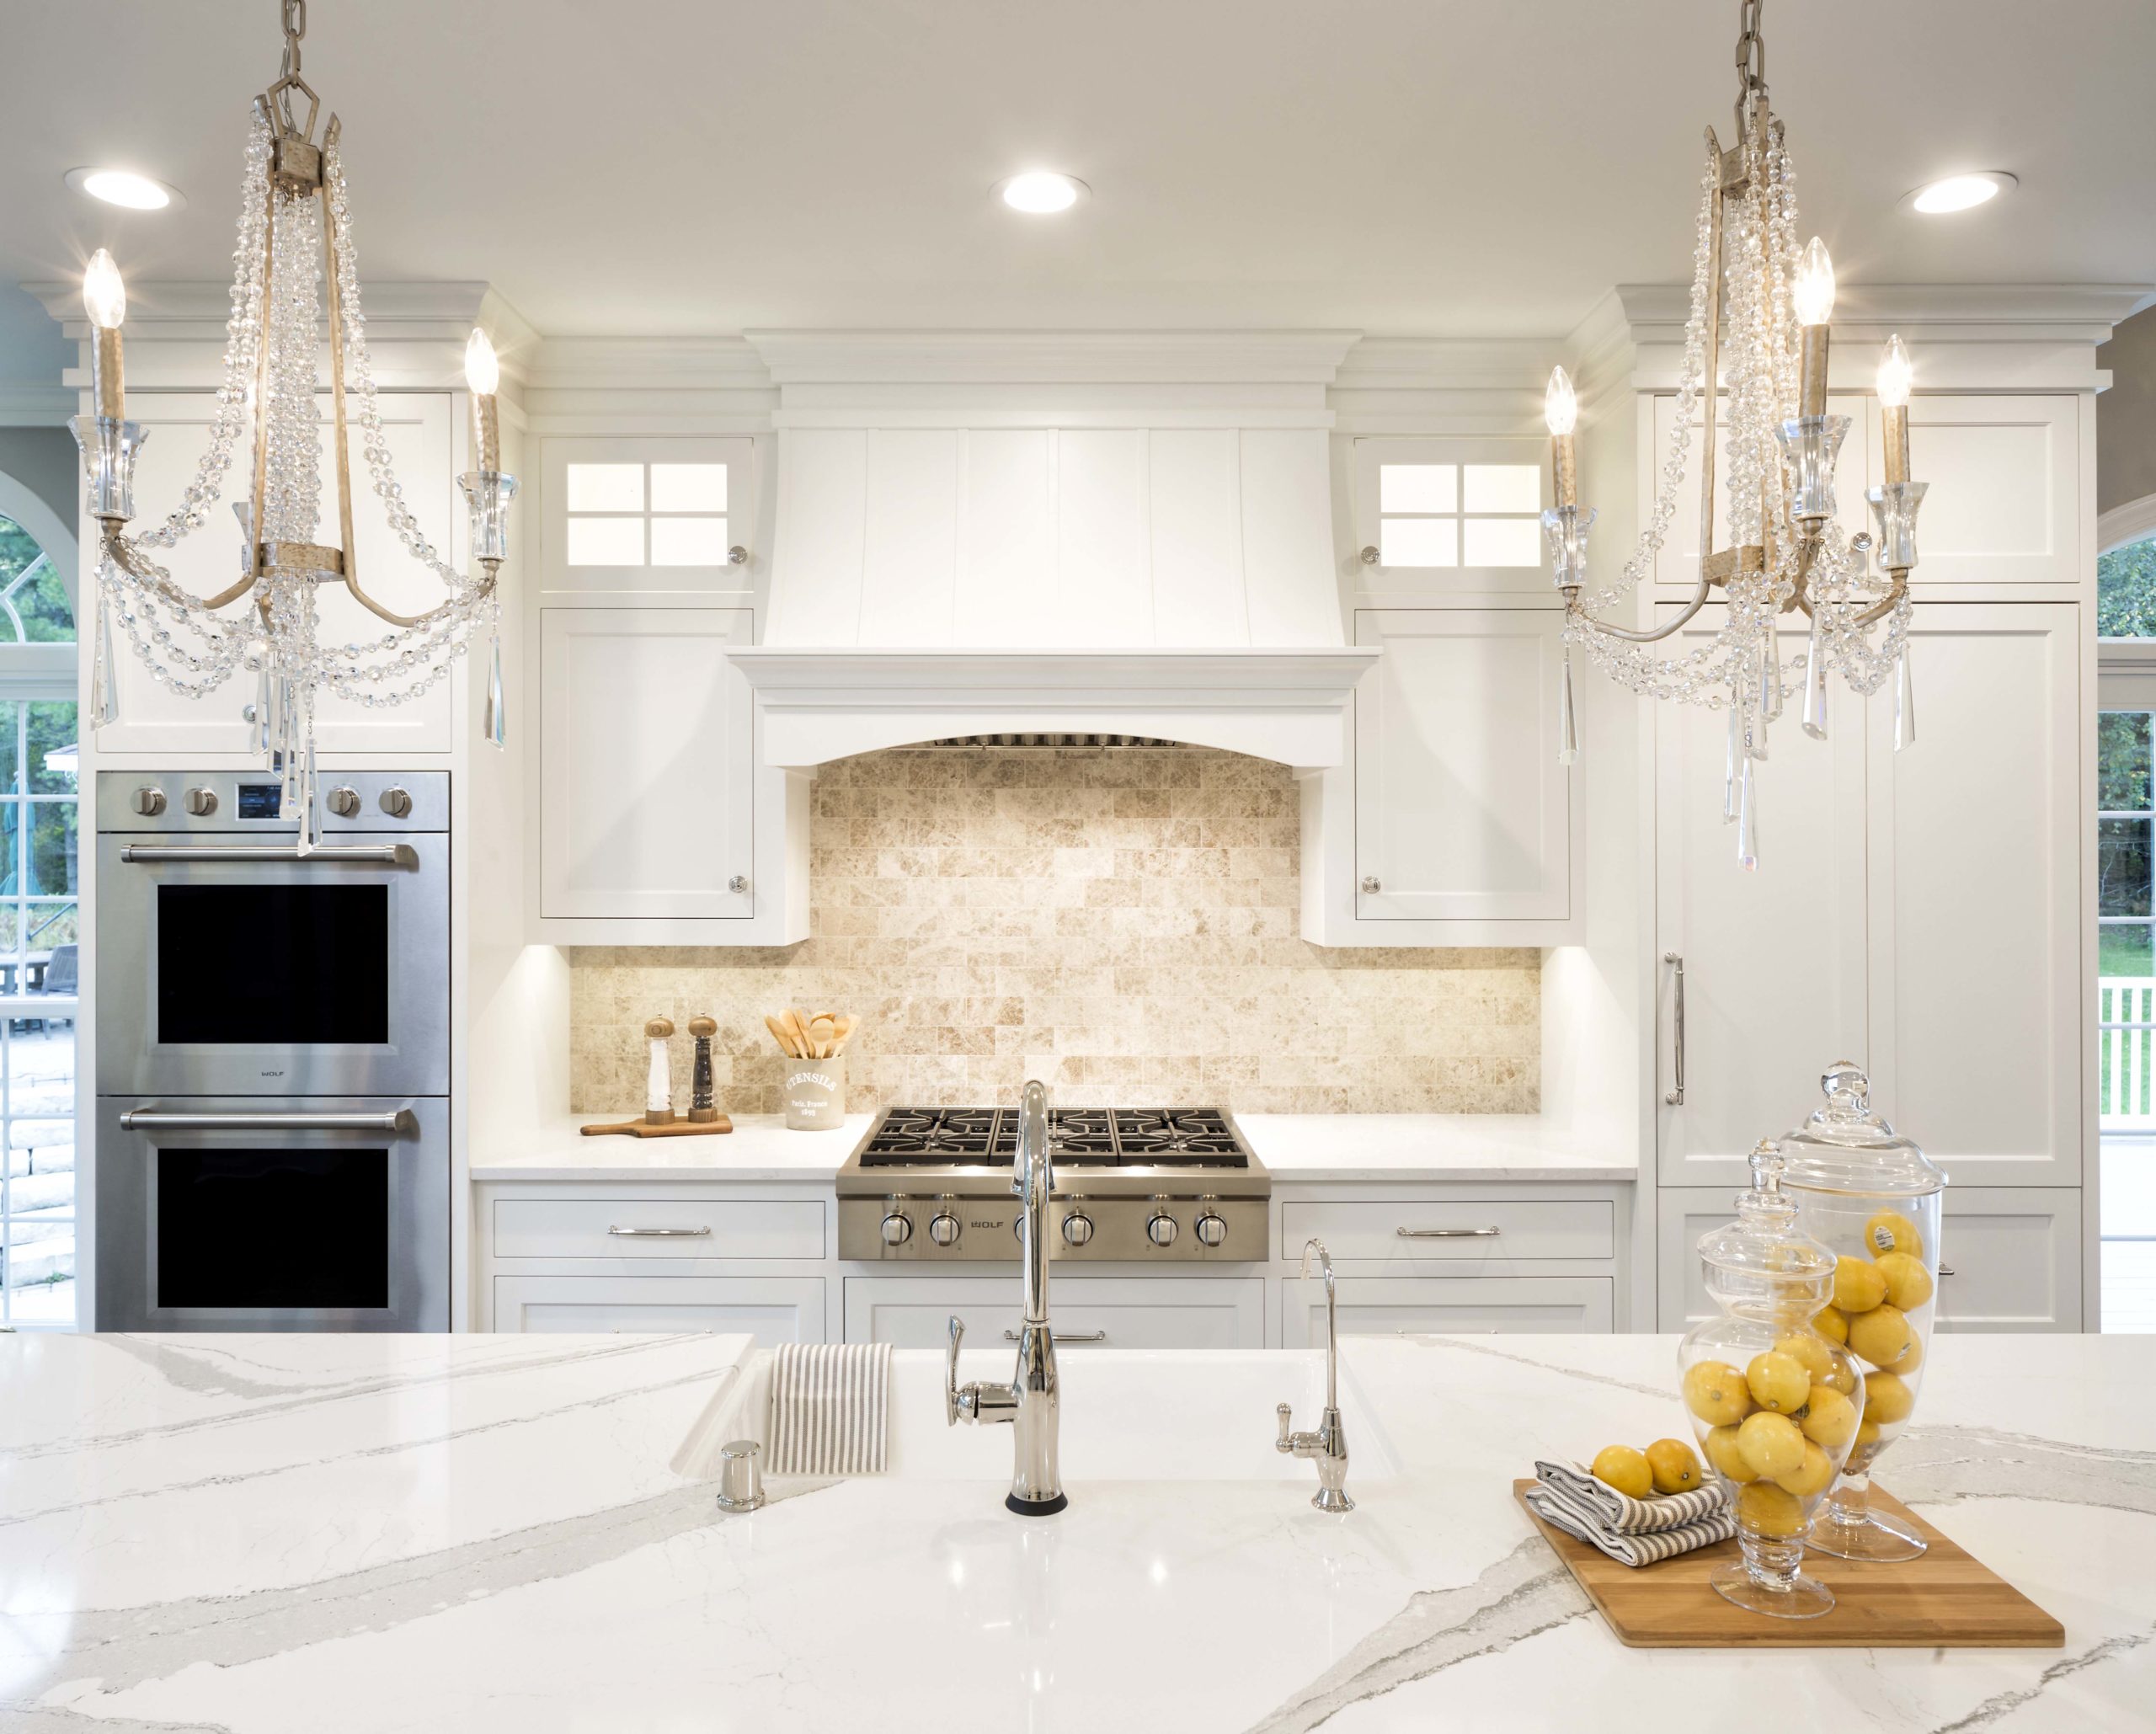 A white kitchen with marble counter tops and a chandelier.